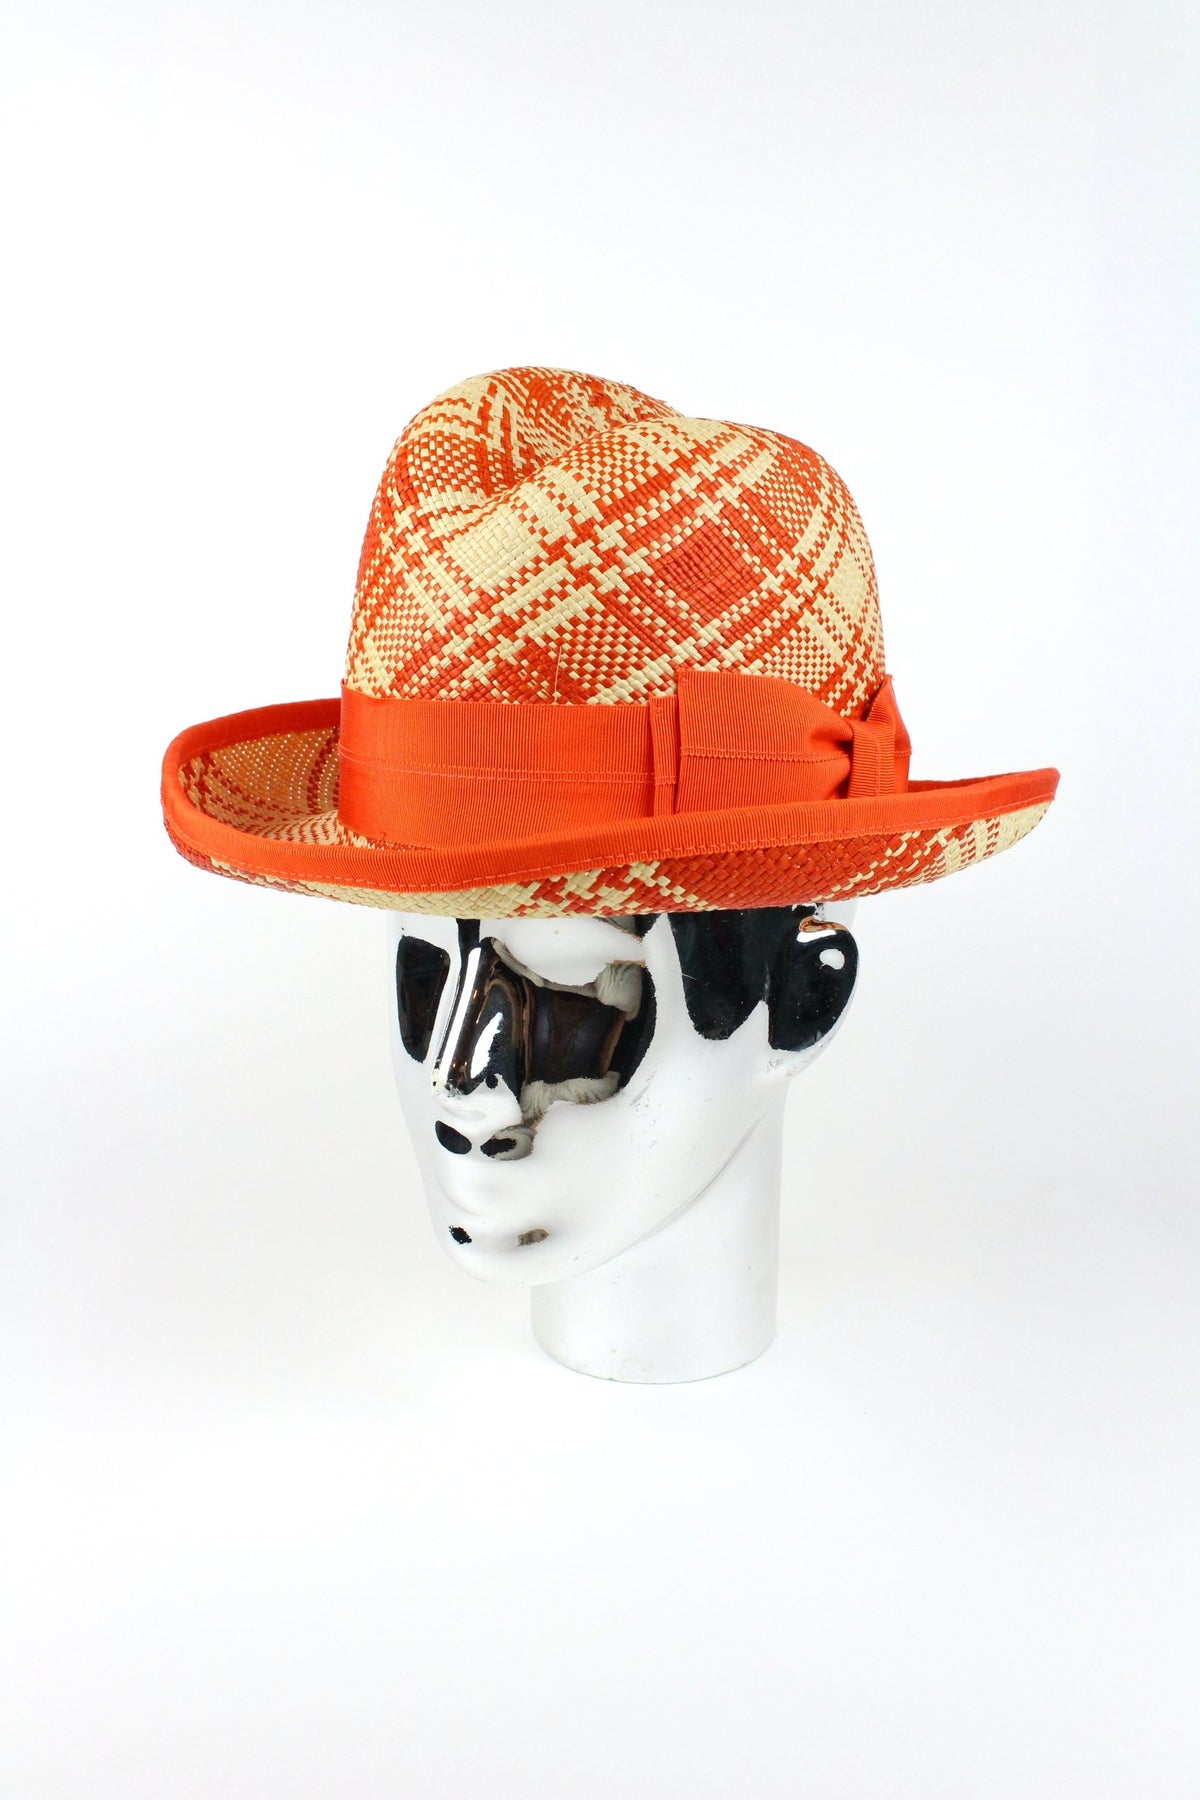 PANAMA FLASH TIPPER - SEVILLE TWIST-hats-A Child Of The Jago